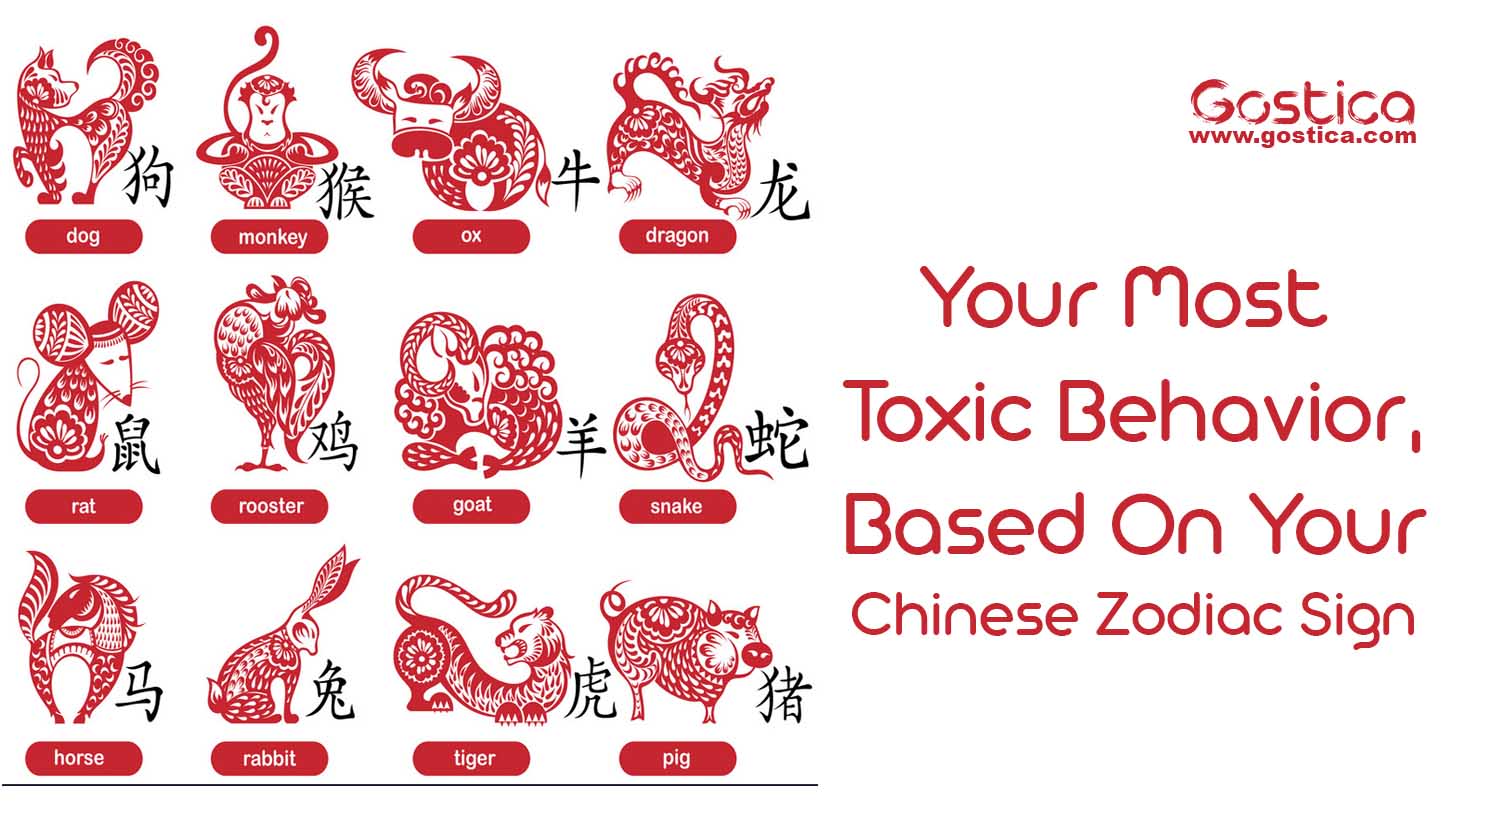 Your-Most-Toxic-Behavior-Based-On-Your-Chinese-Zodiac-Sign.jpg